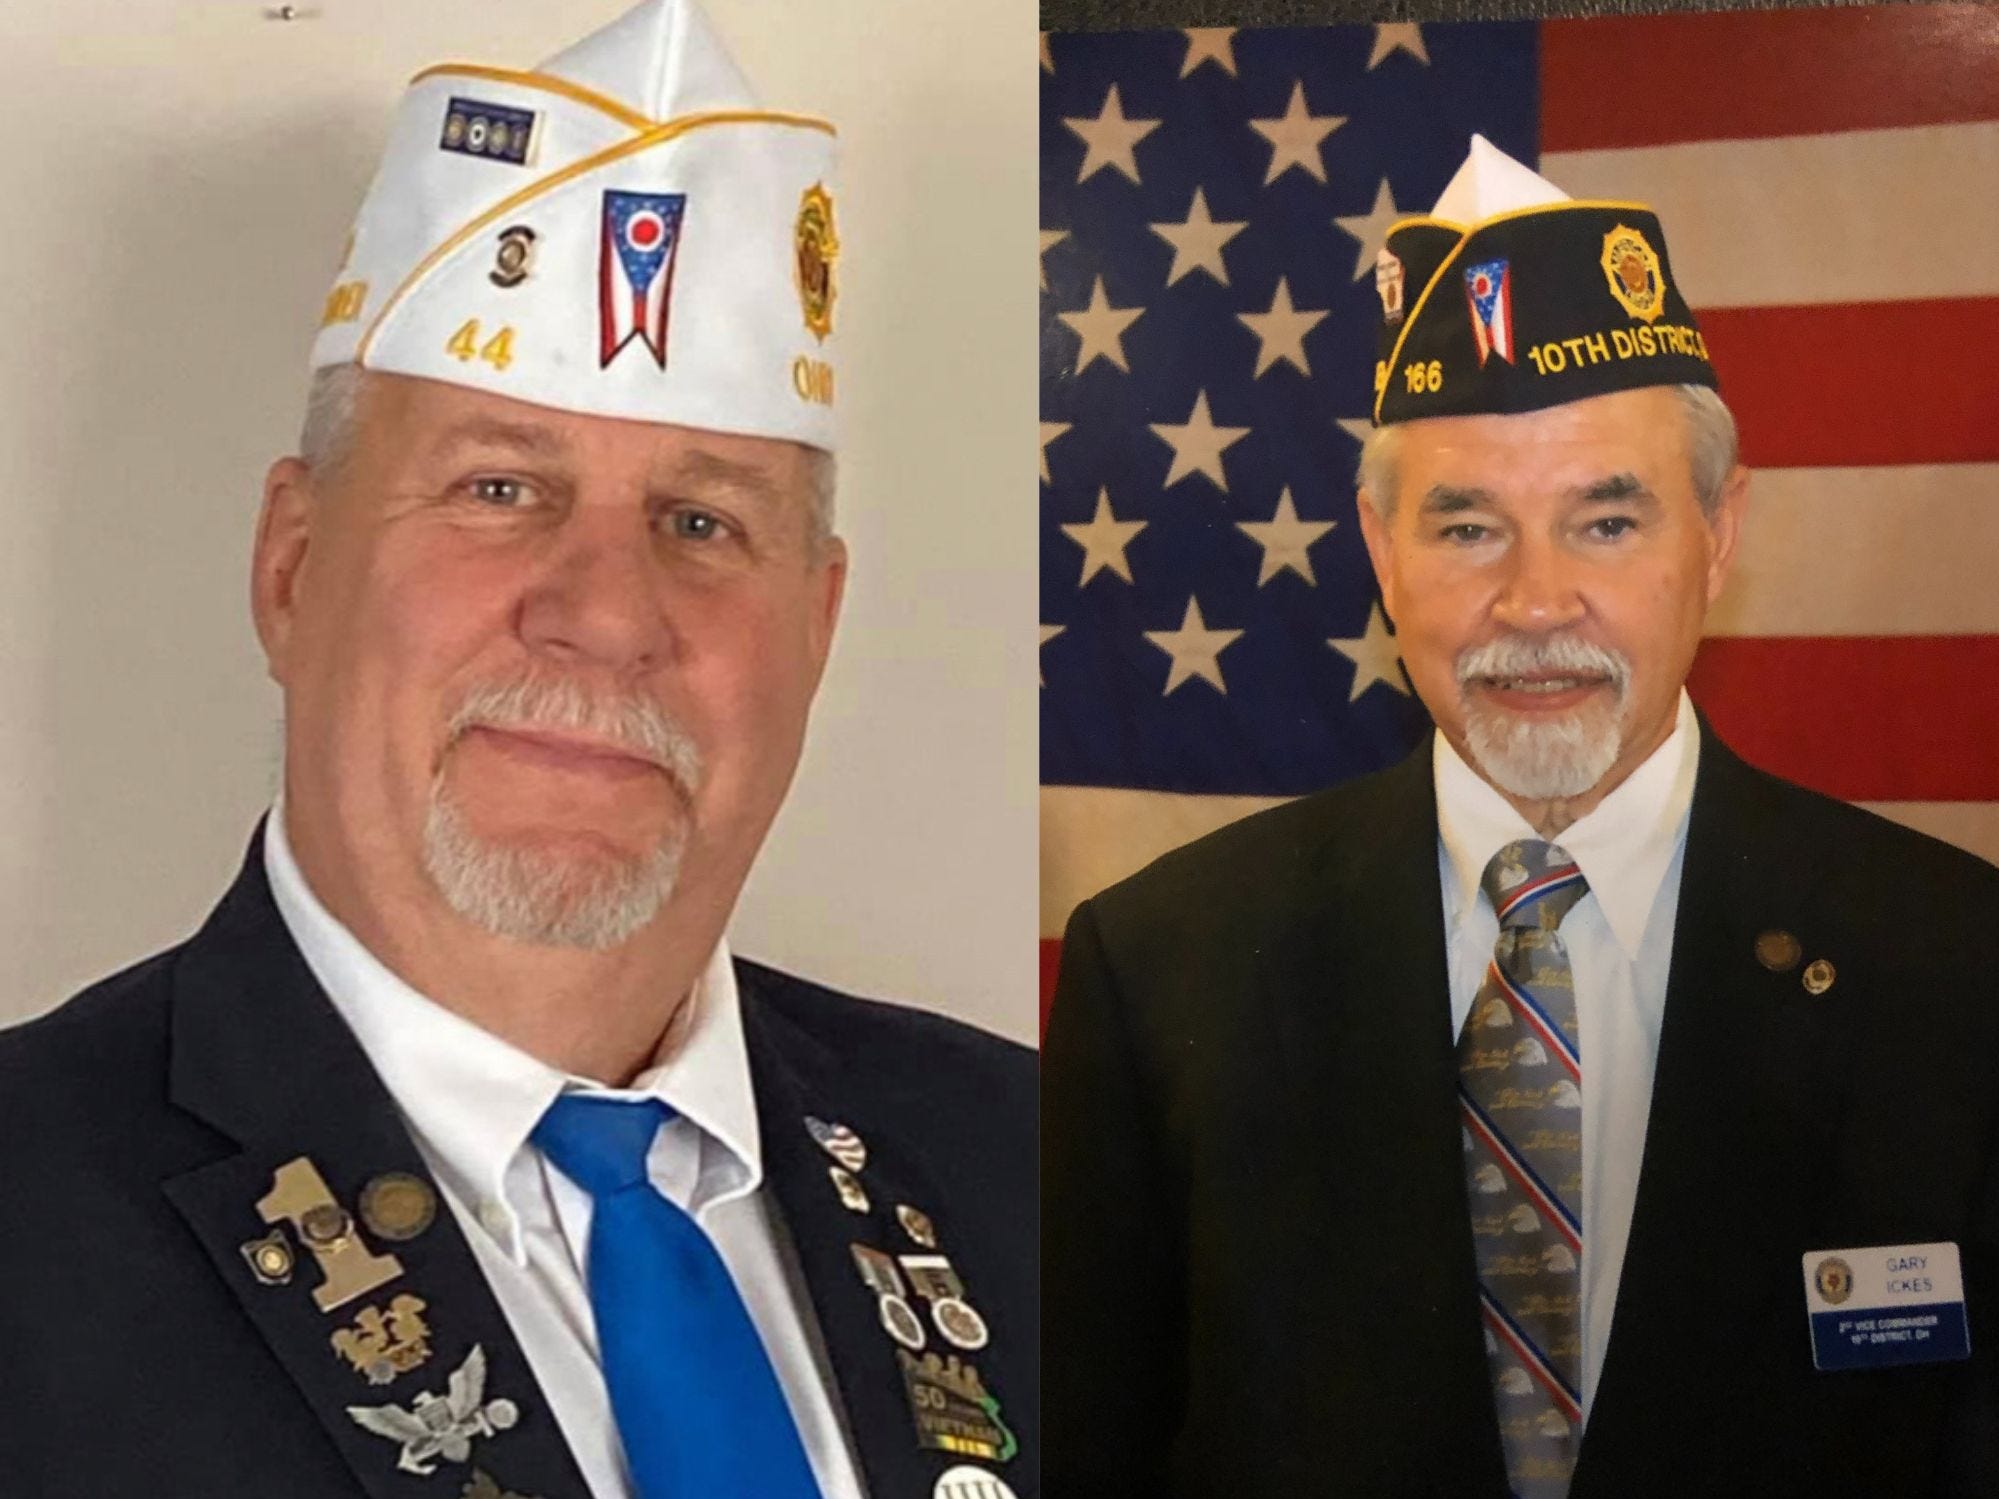 Bradley A. Teis Sr. (left) and Gary L. Ickes (right) will be honored Nov. 11 as Veterans of the Year by the Greater Canton Veterans Service Council. Teis died Aug. 3. His widow, Roxanne, will accept the recognition.